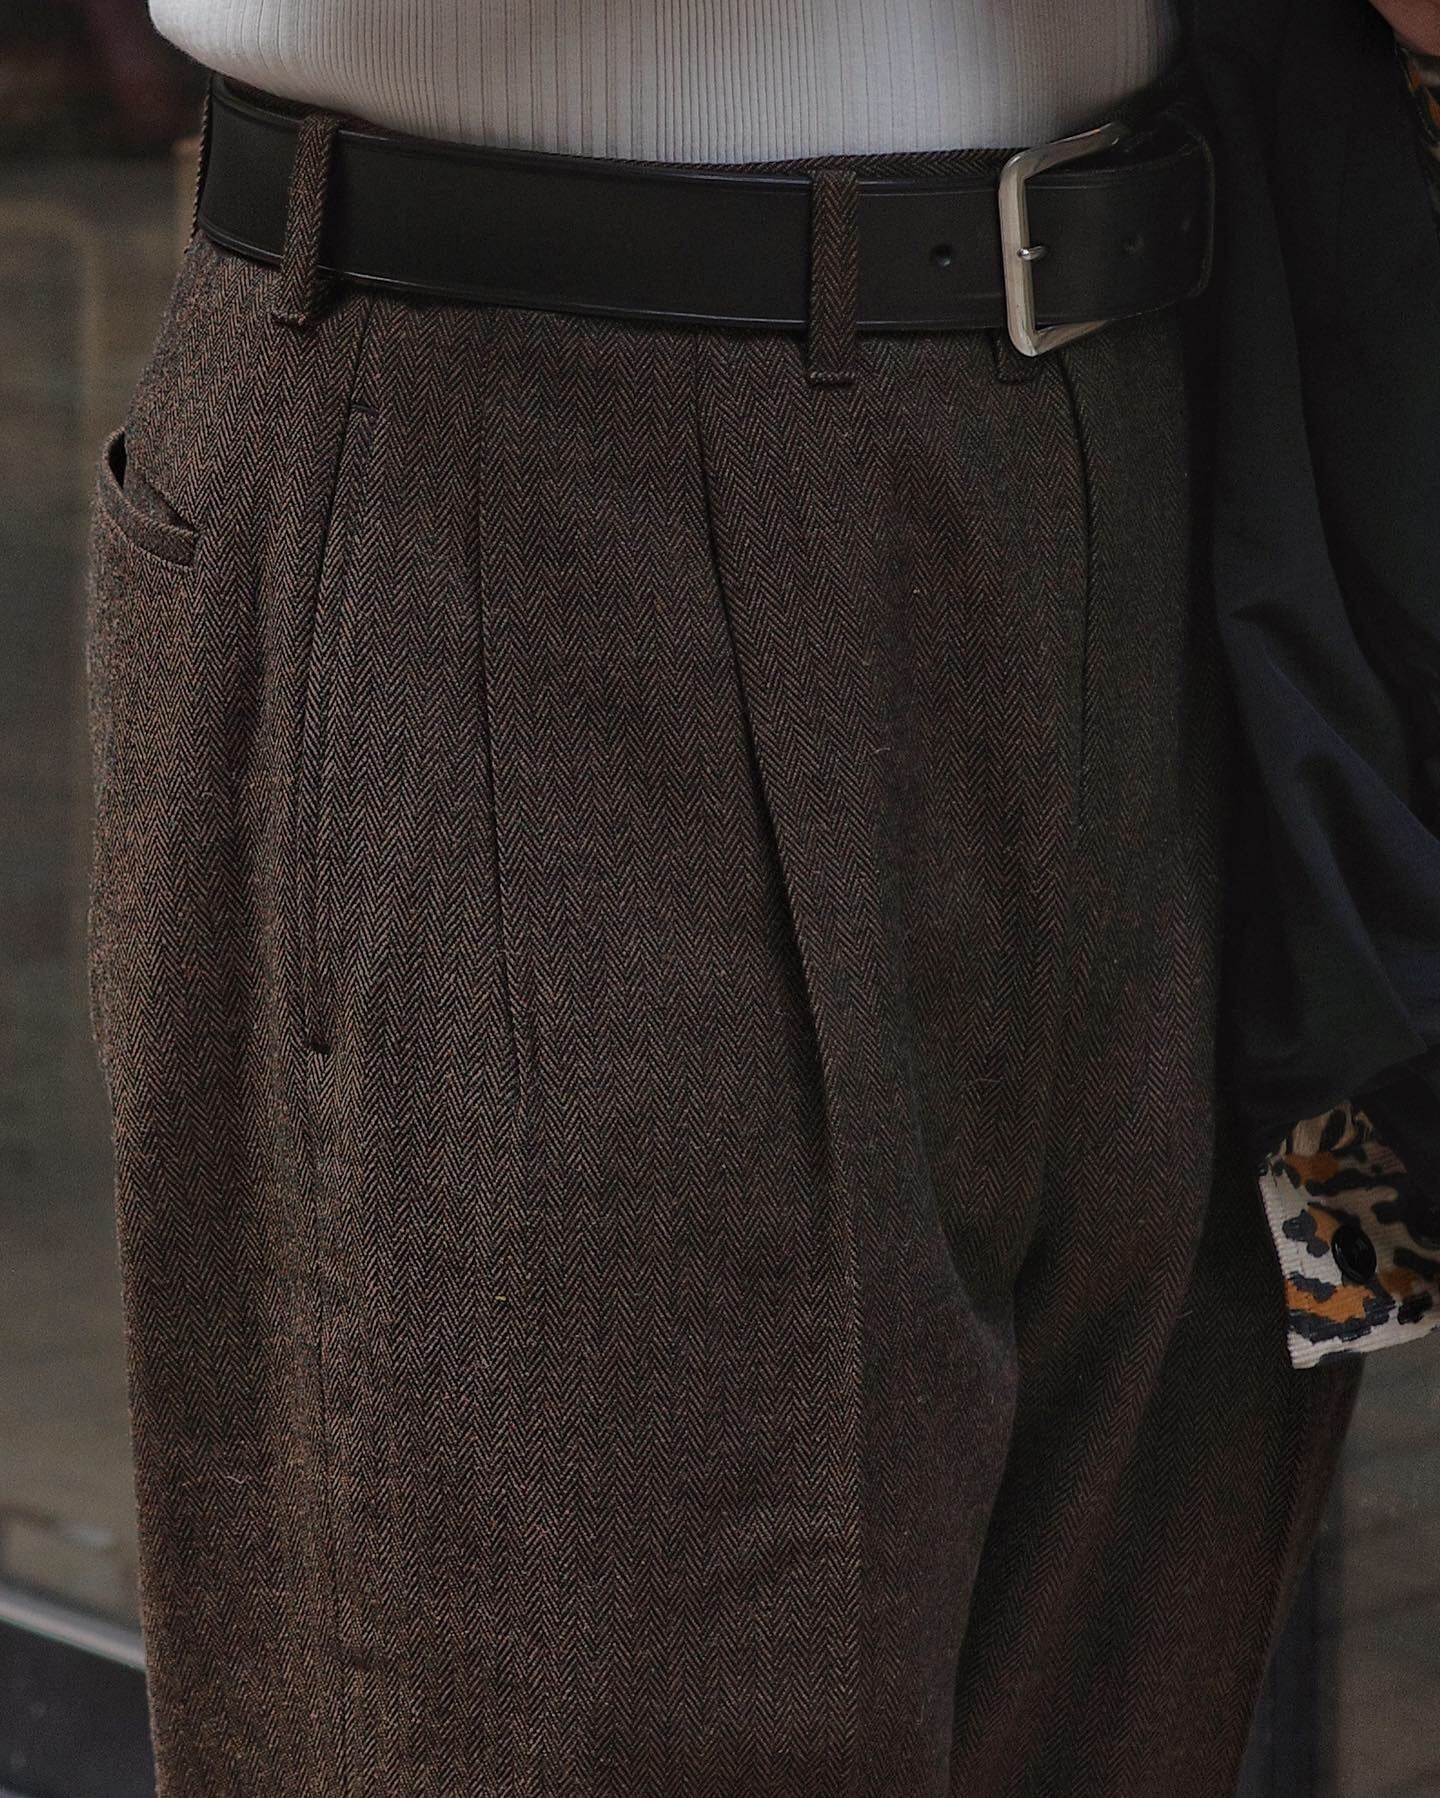 The Groovin High - A405 1940s Style Trousers (Brown)